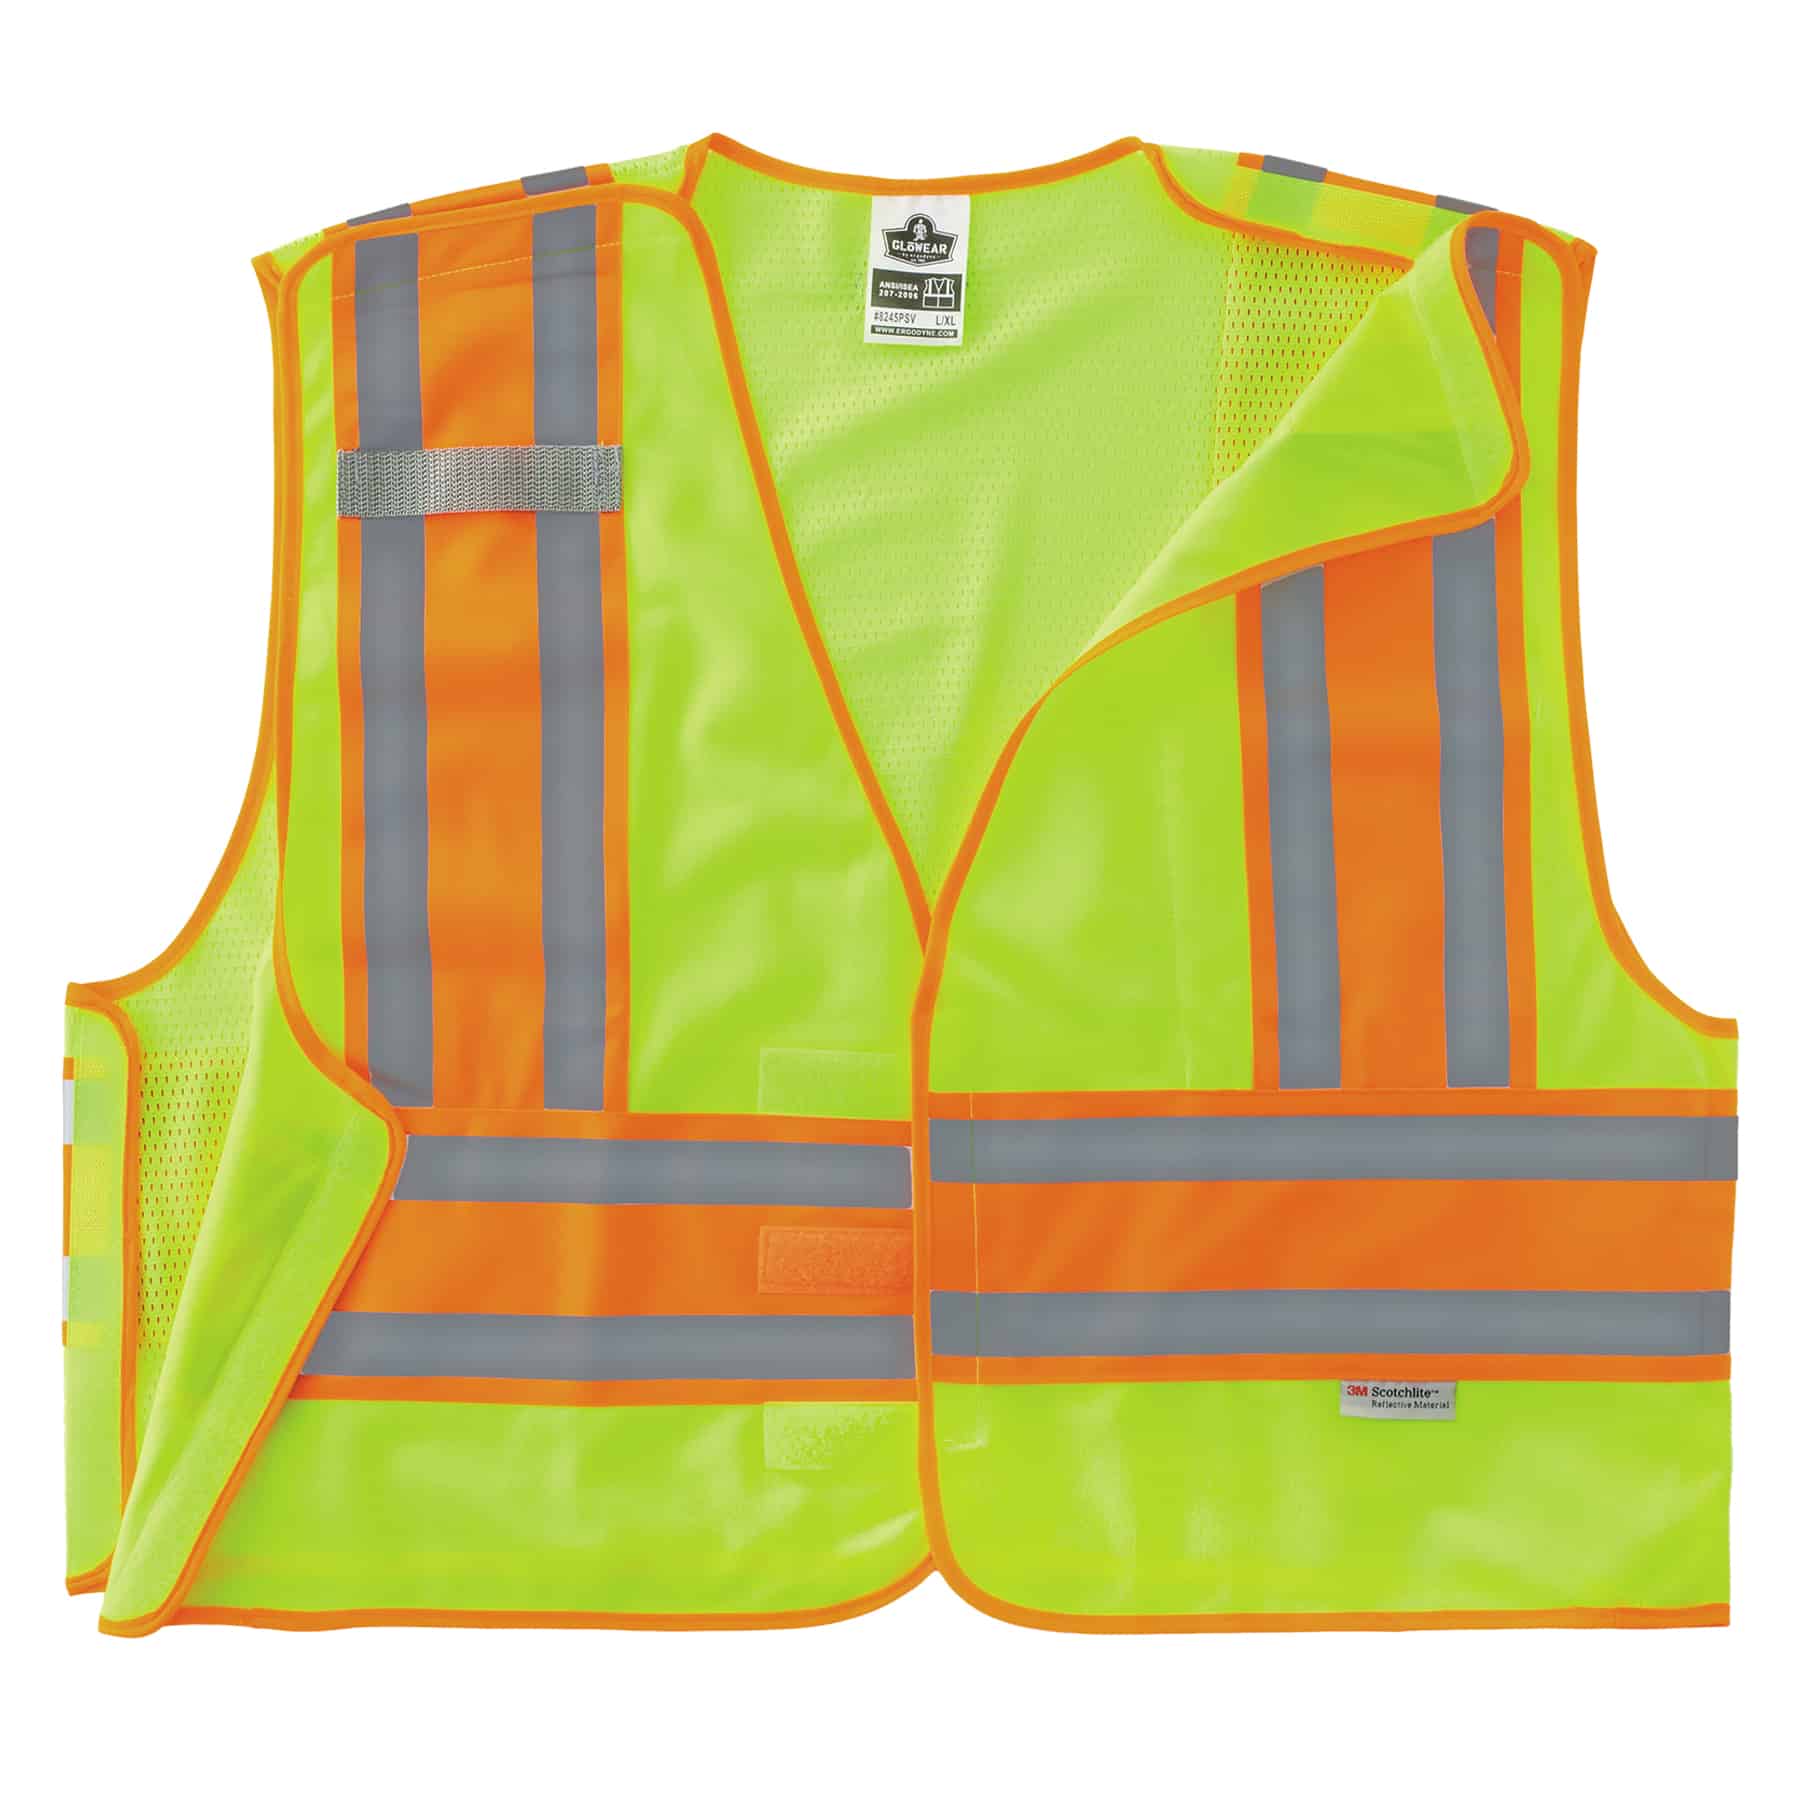 Custom Safety Vests ANSI High Visibility Safety Apparel with Logos,  visibility vest 